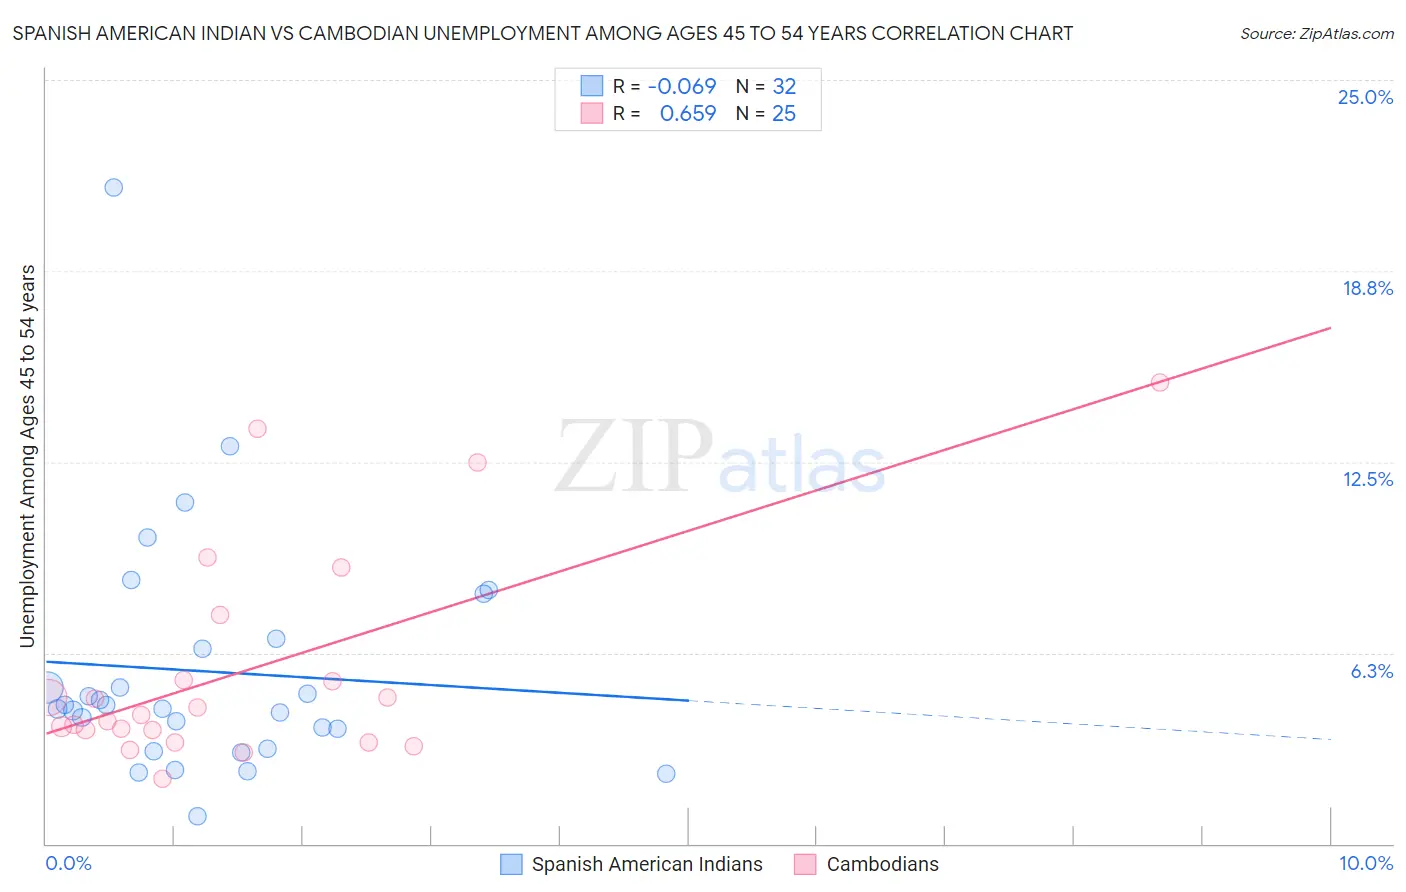 Spanish American Indian vs Cambodian Unemployment Among Ages 45 to 54 years